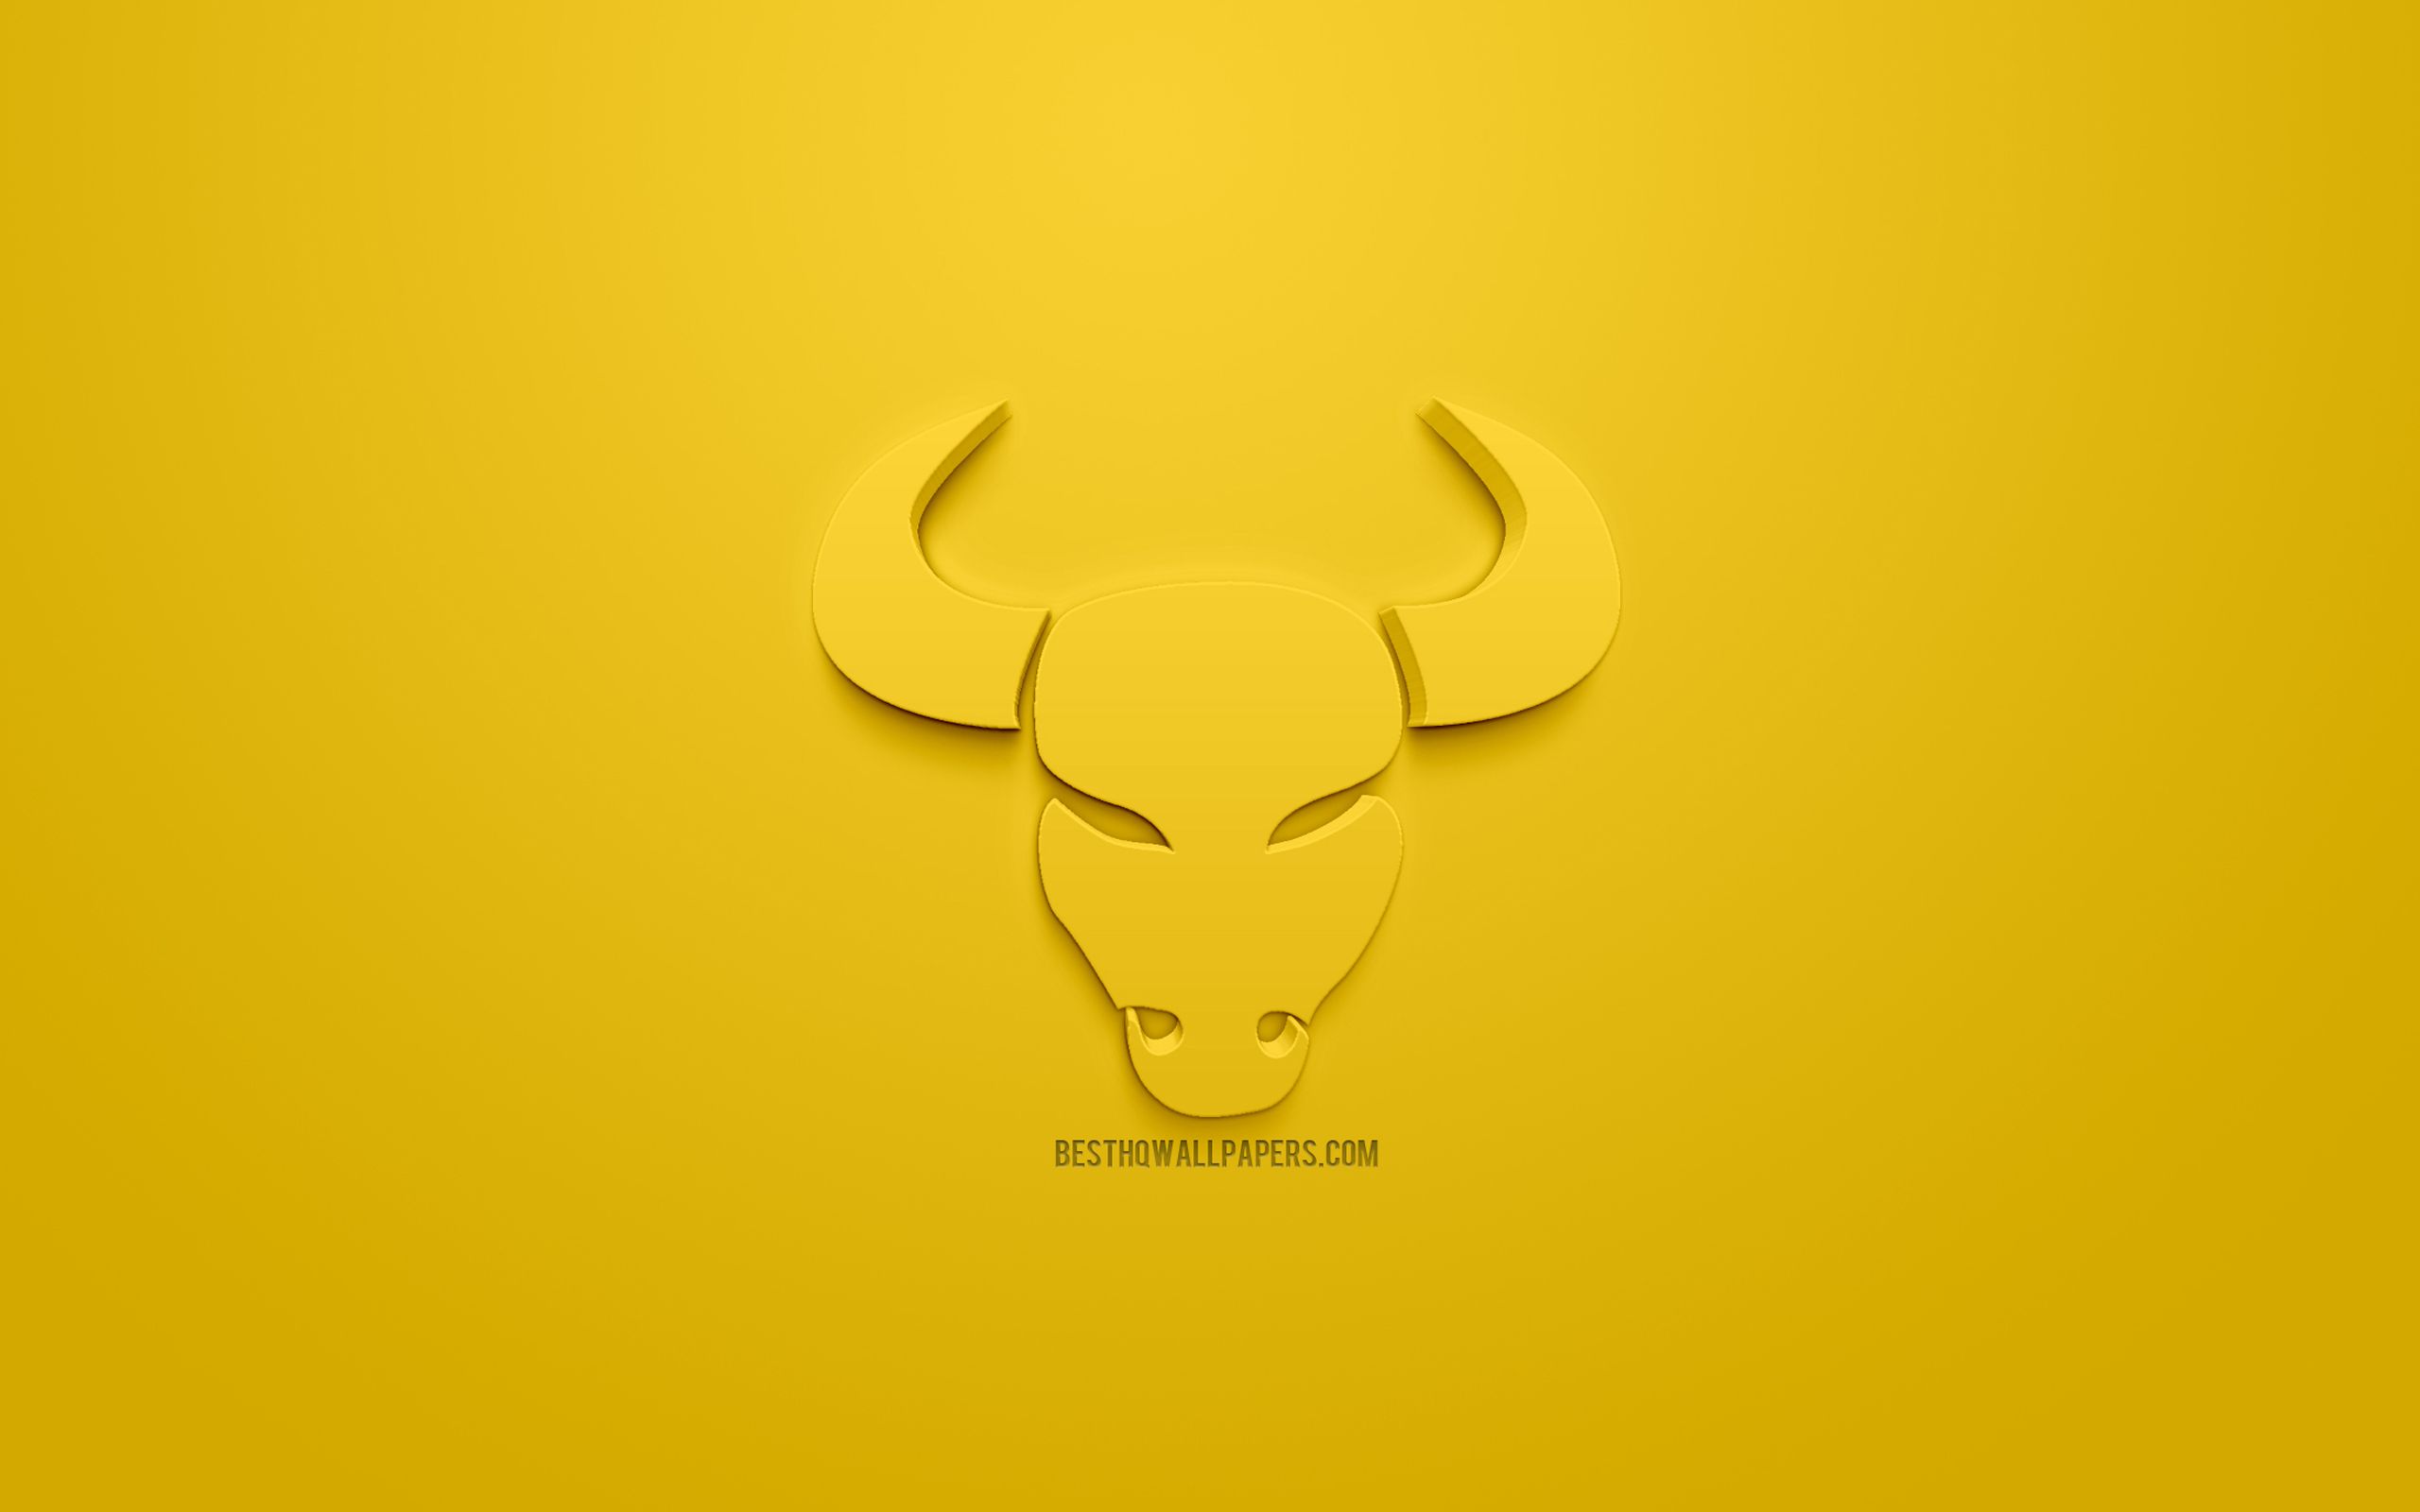 Download wallpaper Taurus zodiac sign, Taurus Horoscope sign, 3D zodiac signs, astrology, Taurus, 3D astrological sign, yellow background, creative 3D art for desktop with resolution 2560x1600. High Quality HD picture wallpaper